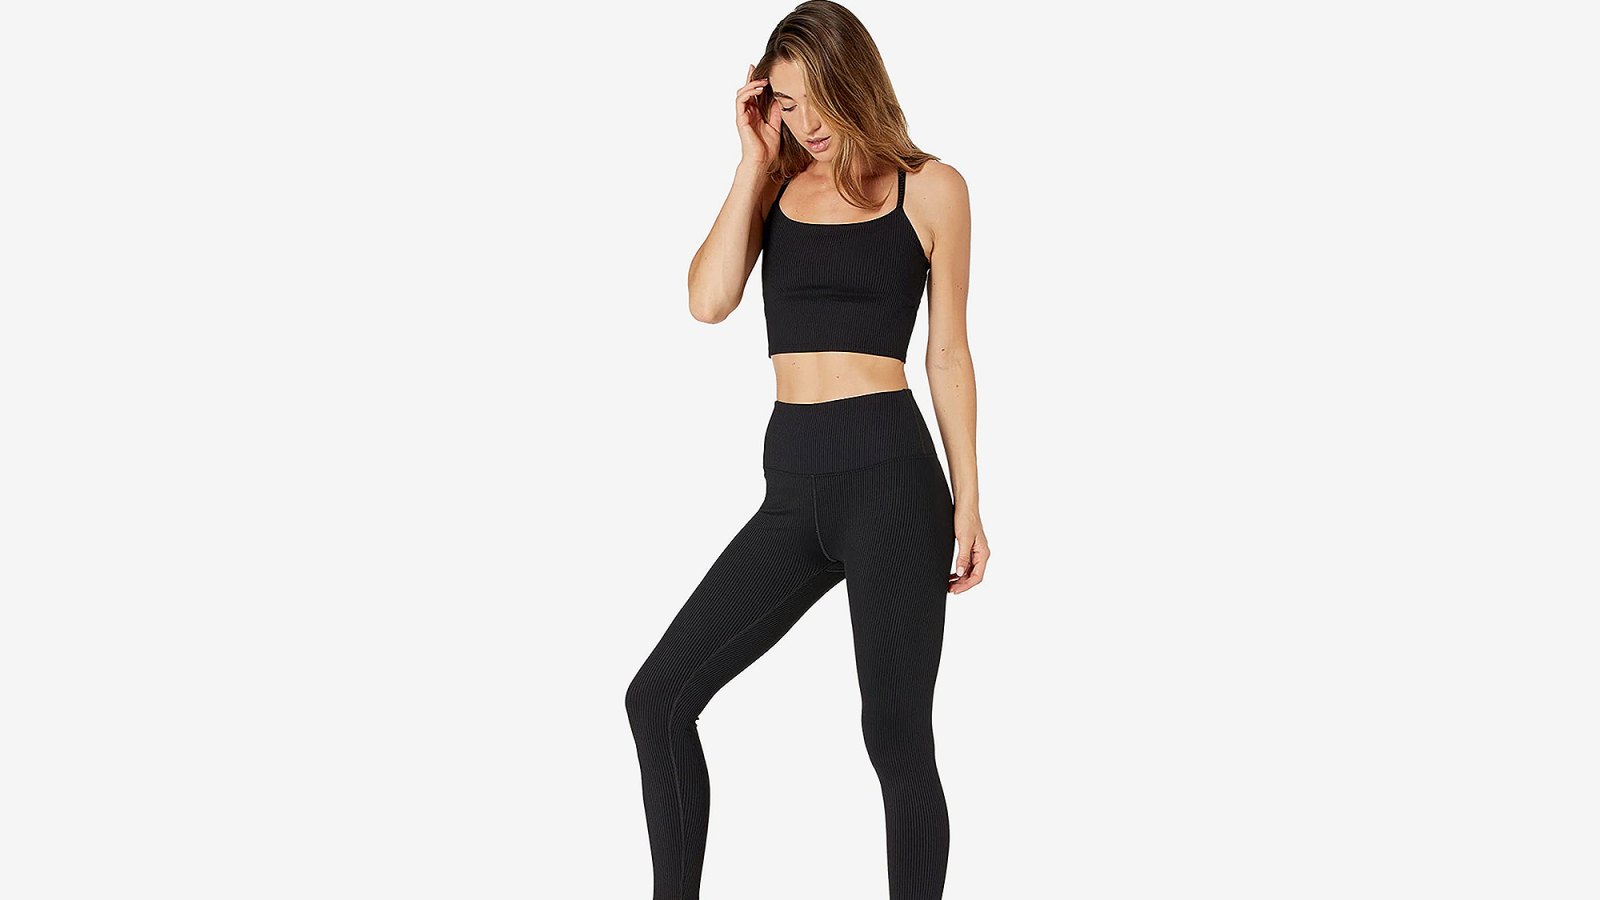 Carbon38 Ribbed Leggings Can Help Hide 'Any Figure Flaws